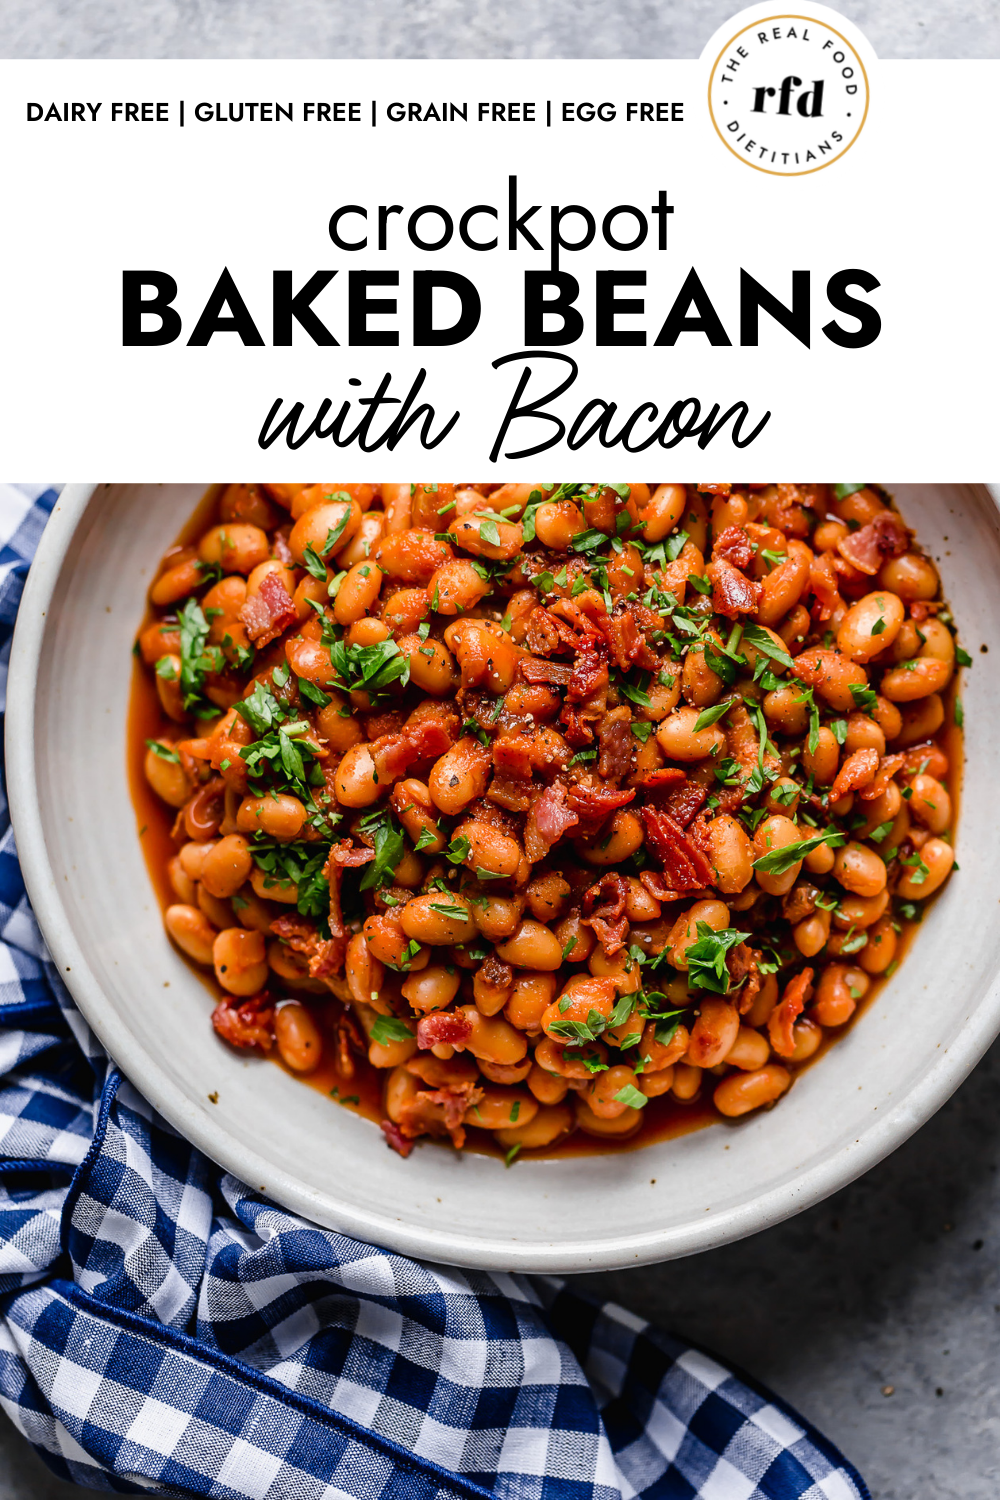 https://therealfooddietitians.com/wp-content/uploads/2022/03/Crockpot-Baked-Beans-with-Bacon-1000-%C3%97-1500-px-1.png